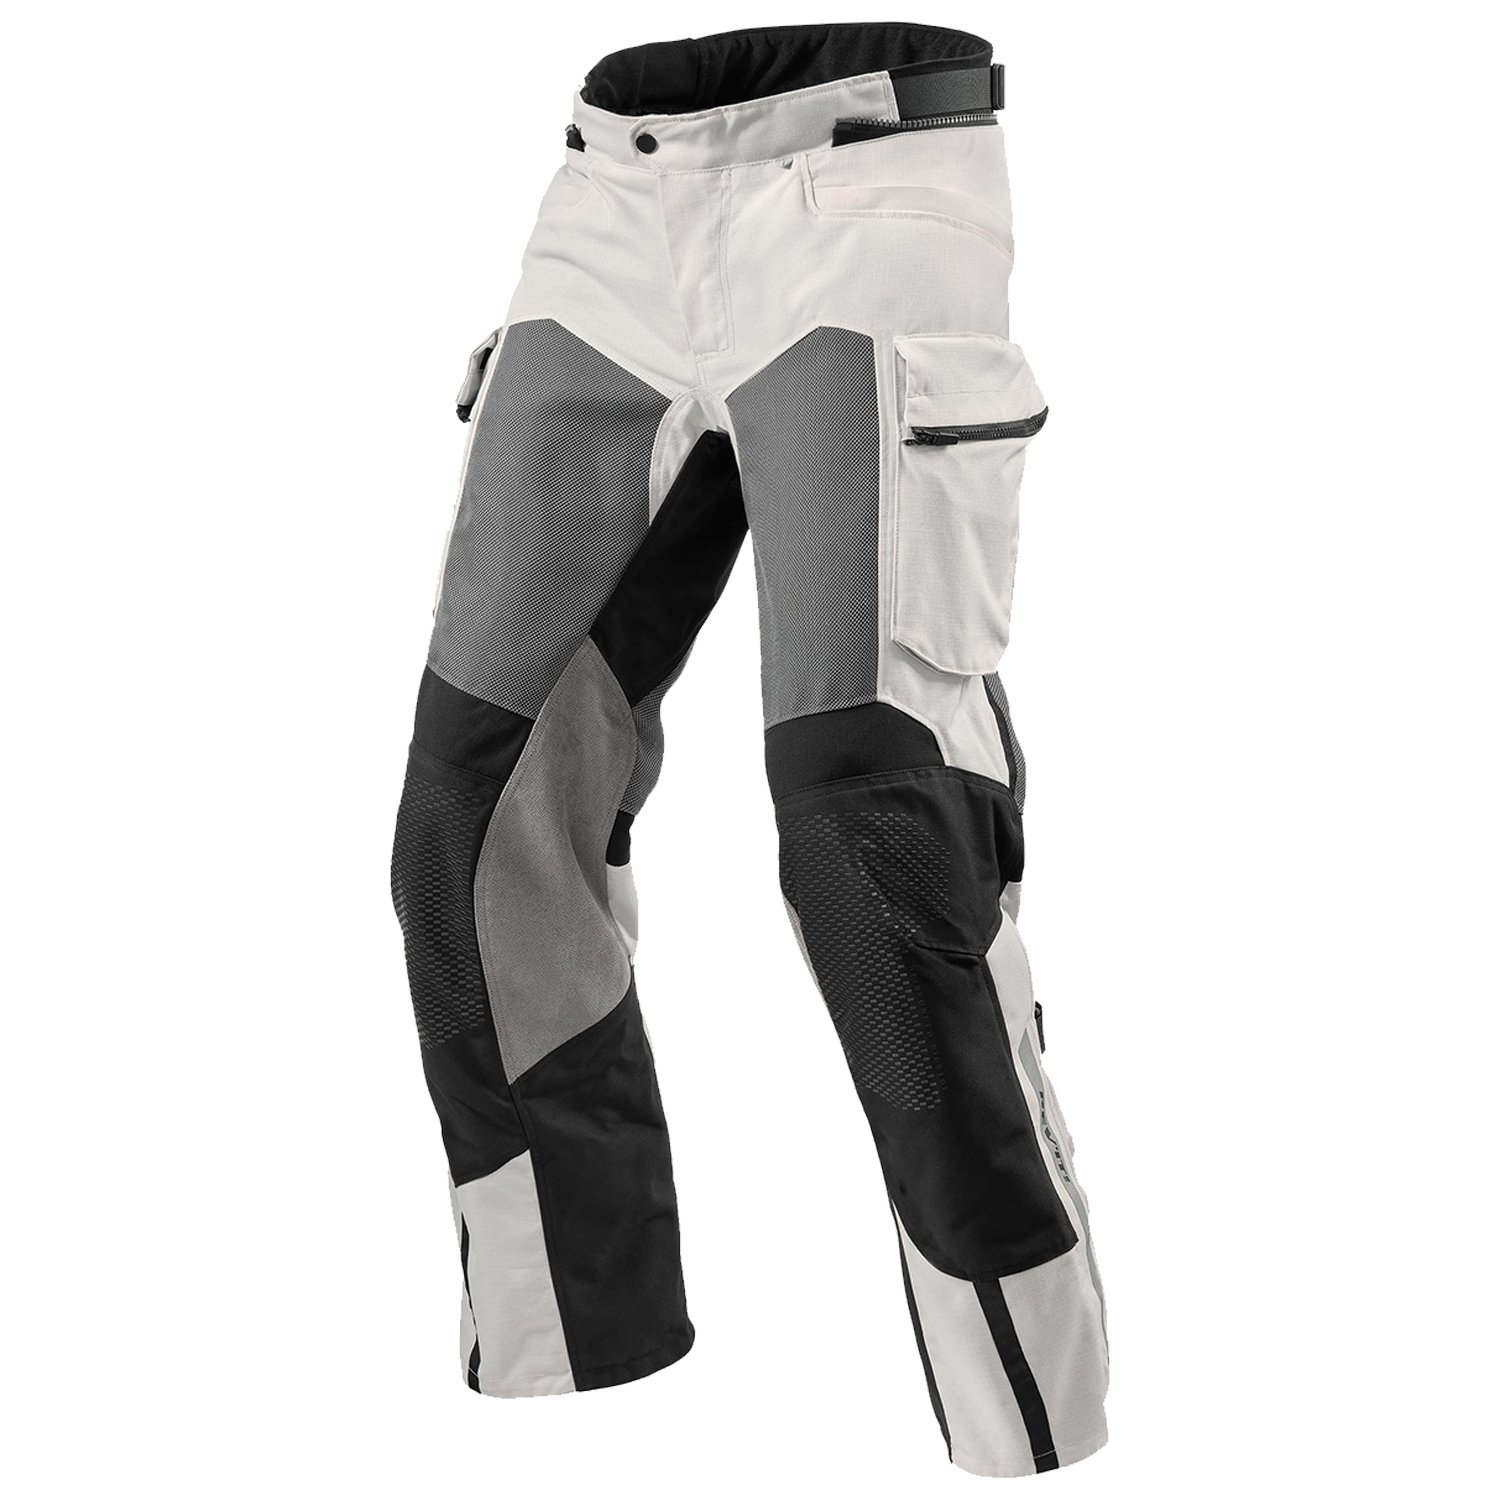 Image of REV'IT! Cayenne 2 Silver Short Motorcycle Pants Size L ID 8700001335522